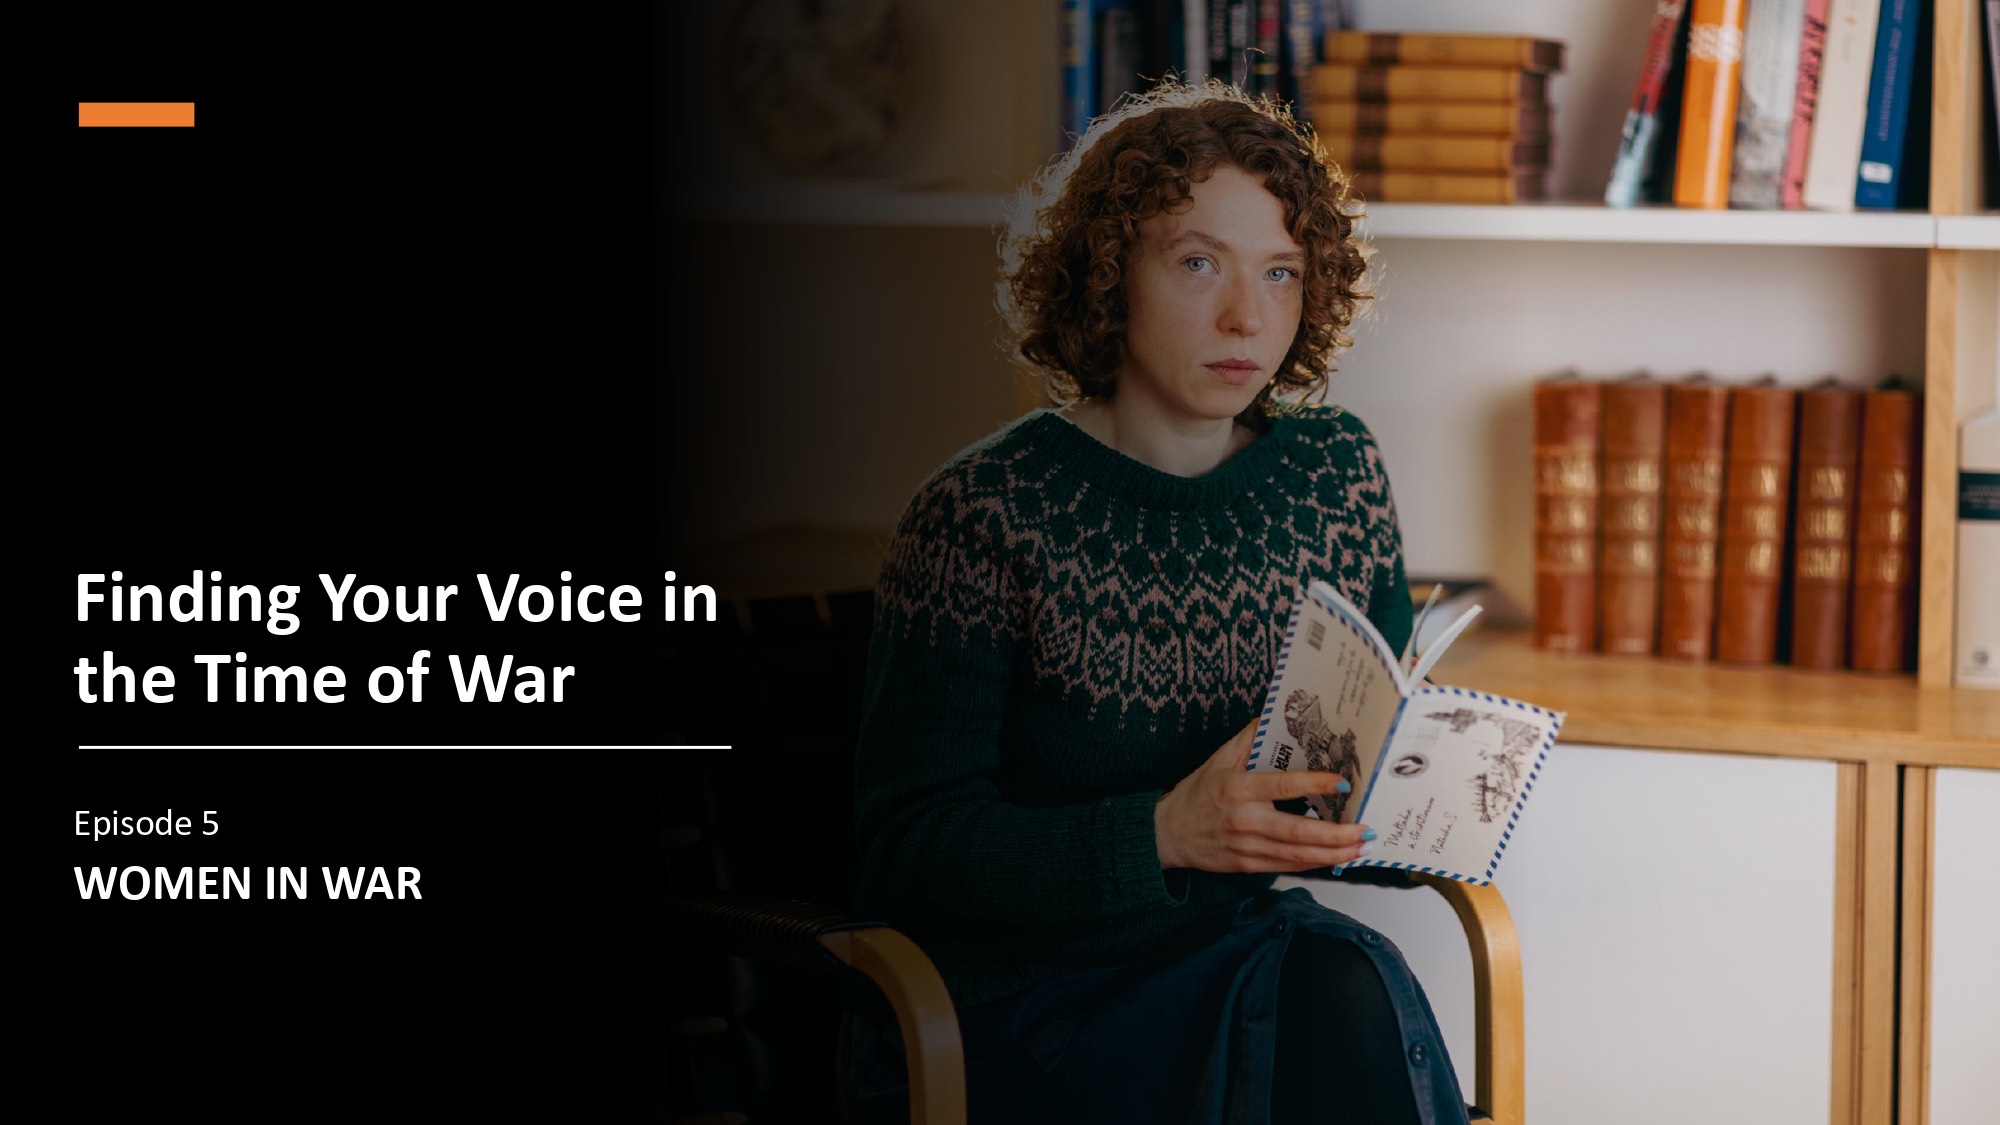 WOMEN IN WAR: Finding Your Voice in the Time of War